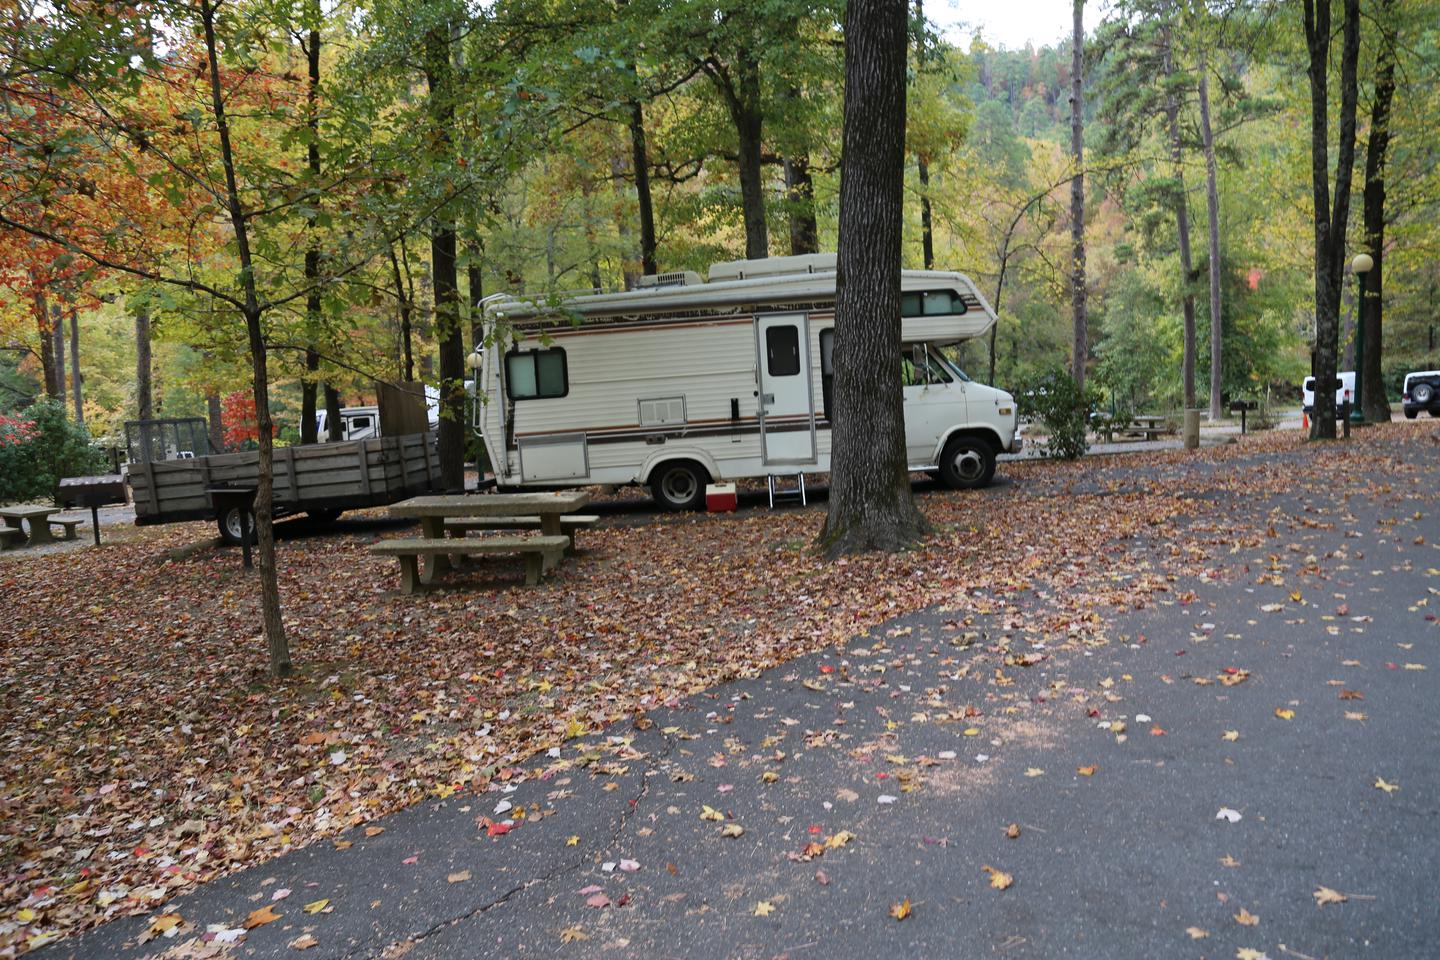 Small RV in paved campsite surrounded by leaves on the ground and treesCampsite 6